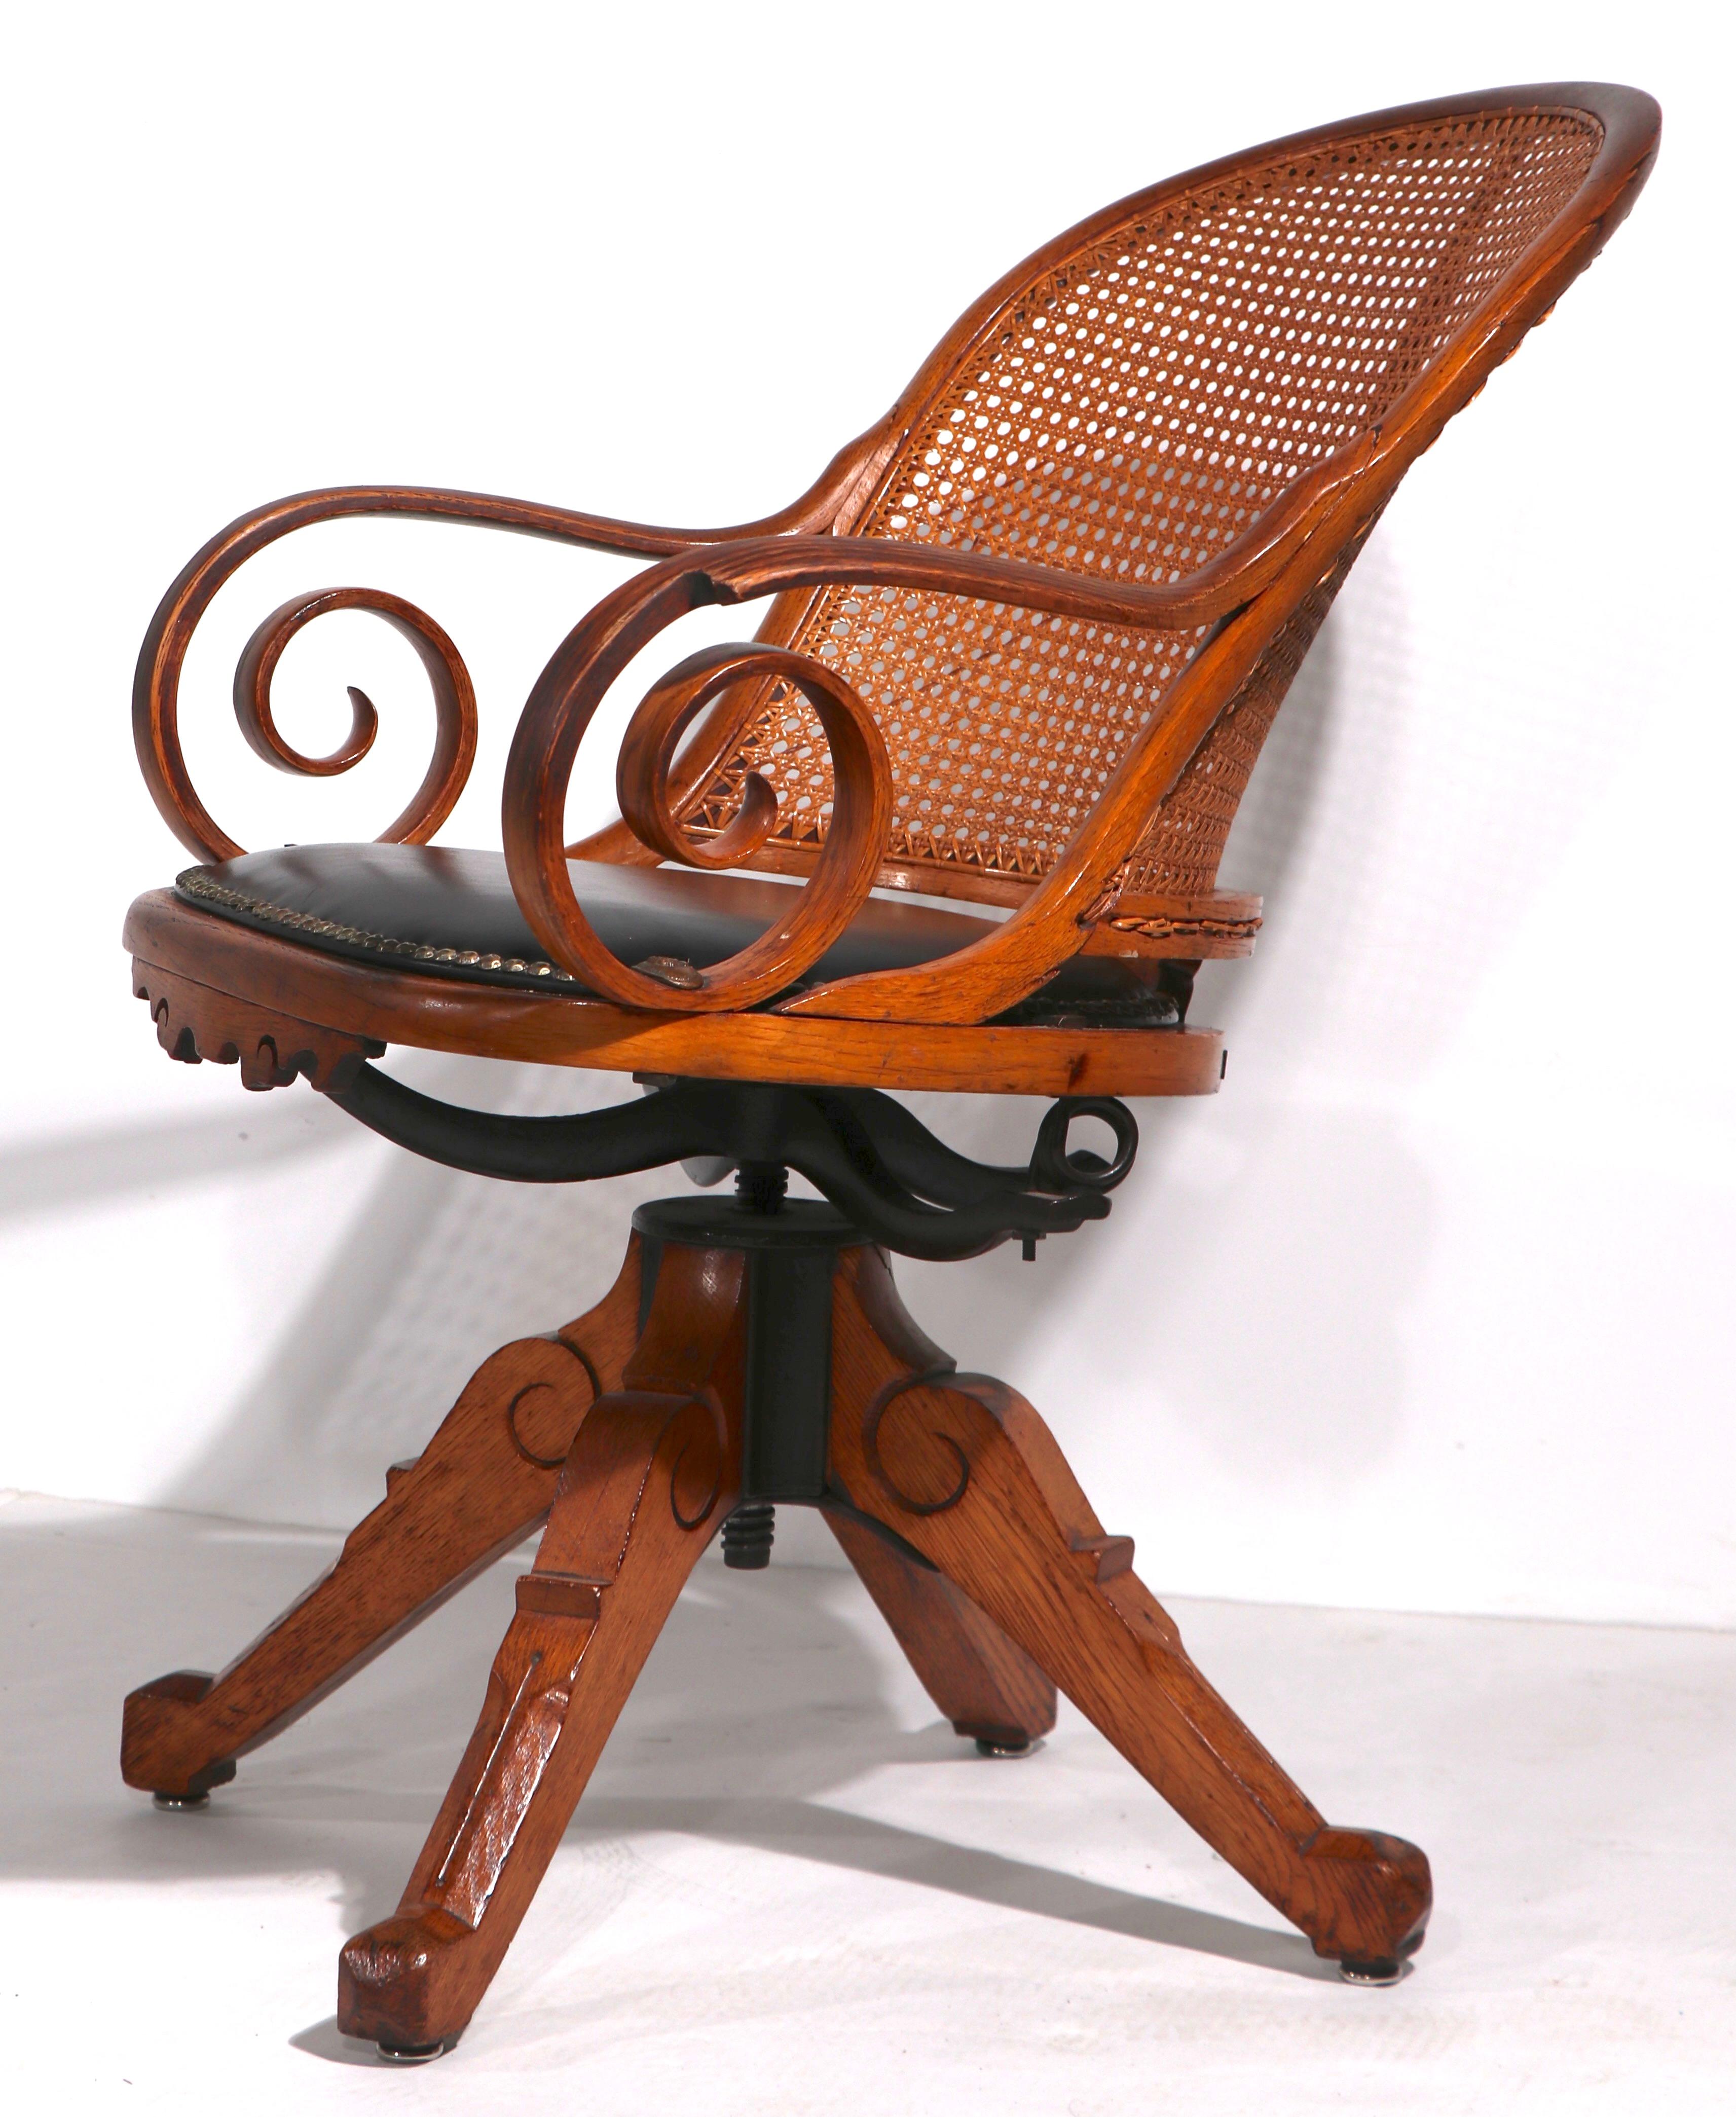 Top quality Victorian swivel desk chair with caned back, and metal medallion joinery. The chair features bentwood curlicue arms, and a four leg pyramid form base. Design attributed to Charles Eastlake, Aesthetic Movement period production. This